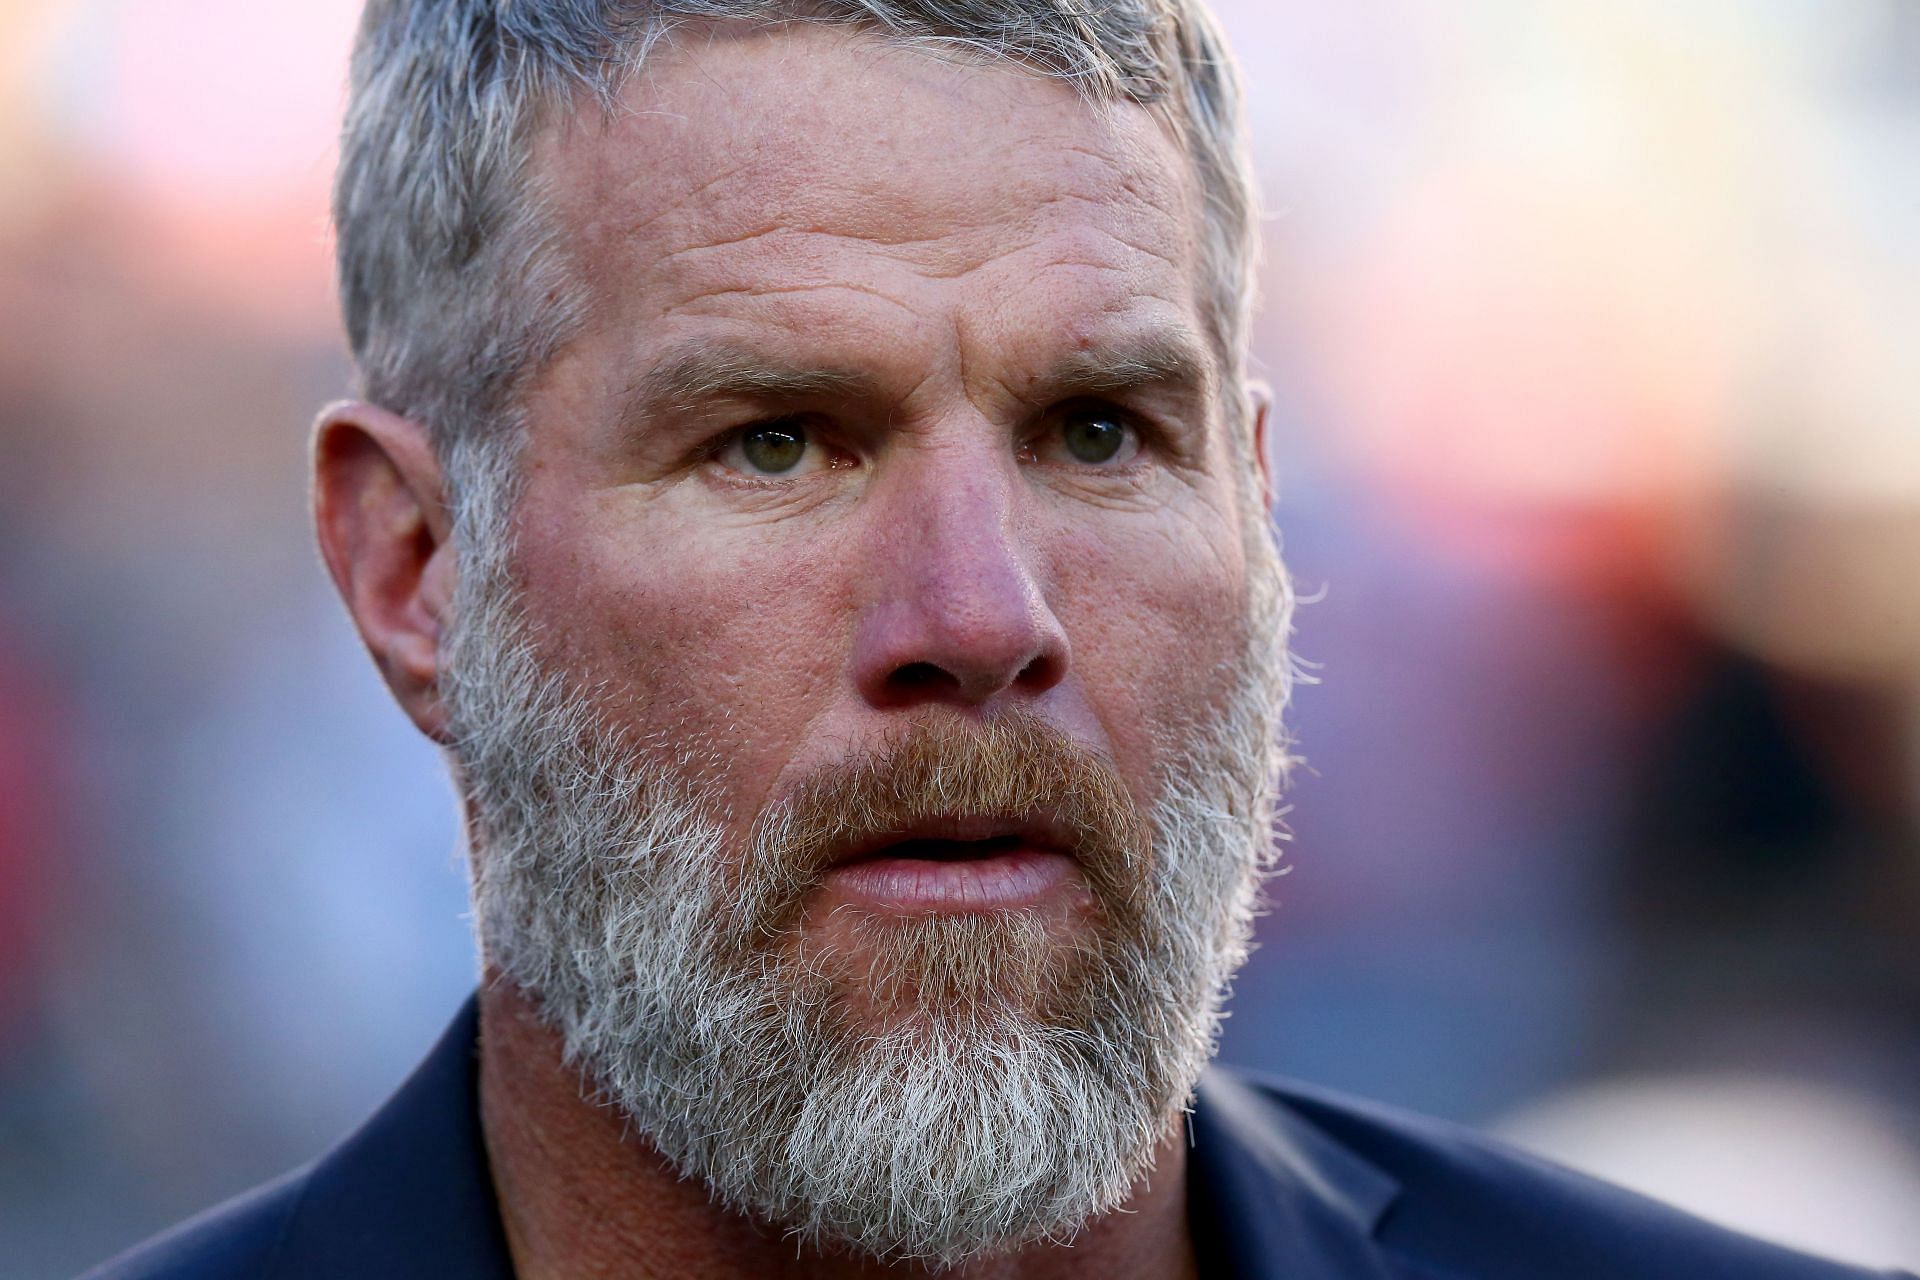 Brett Favre was not a great quarterback for the Jets